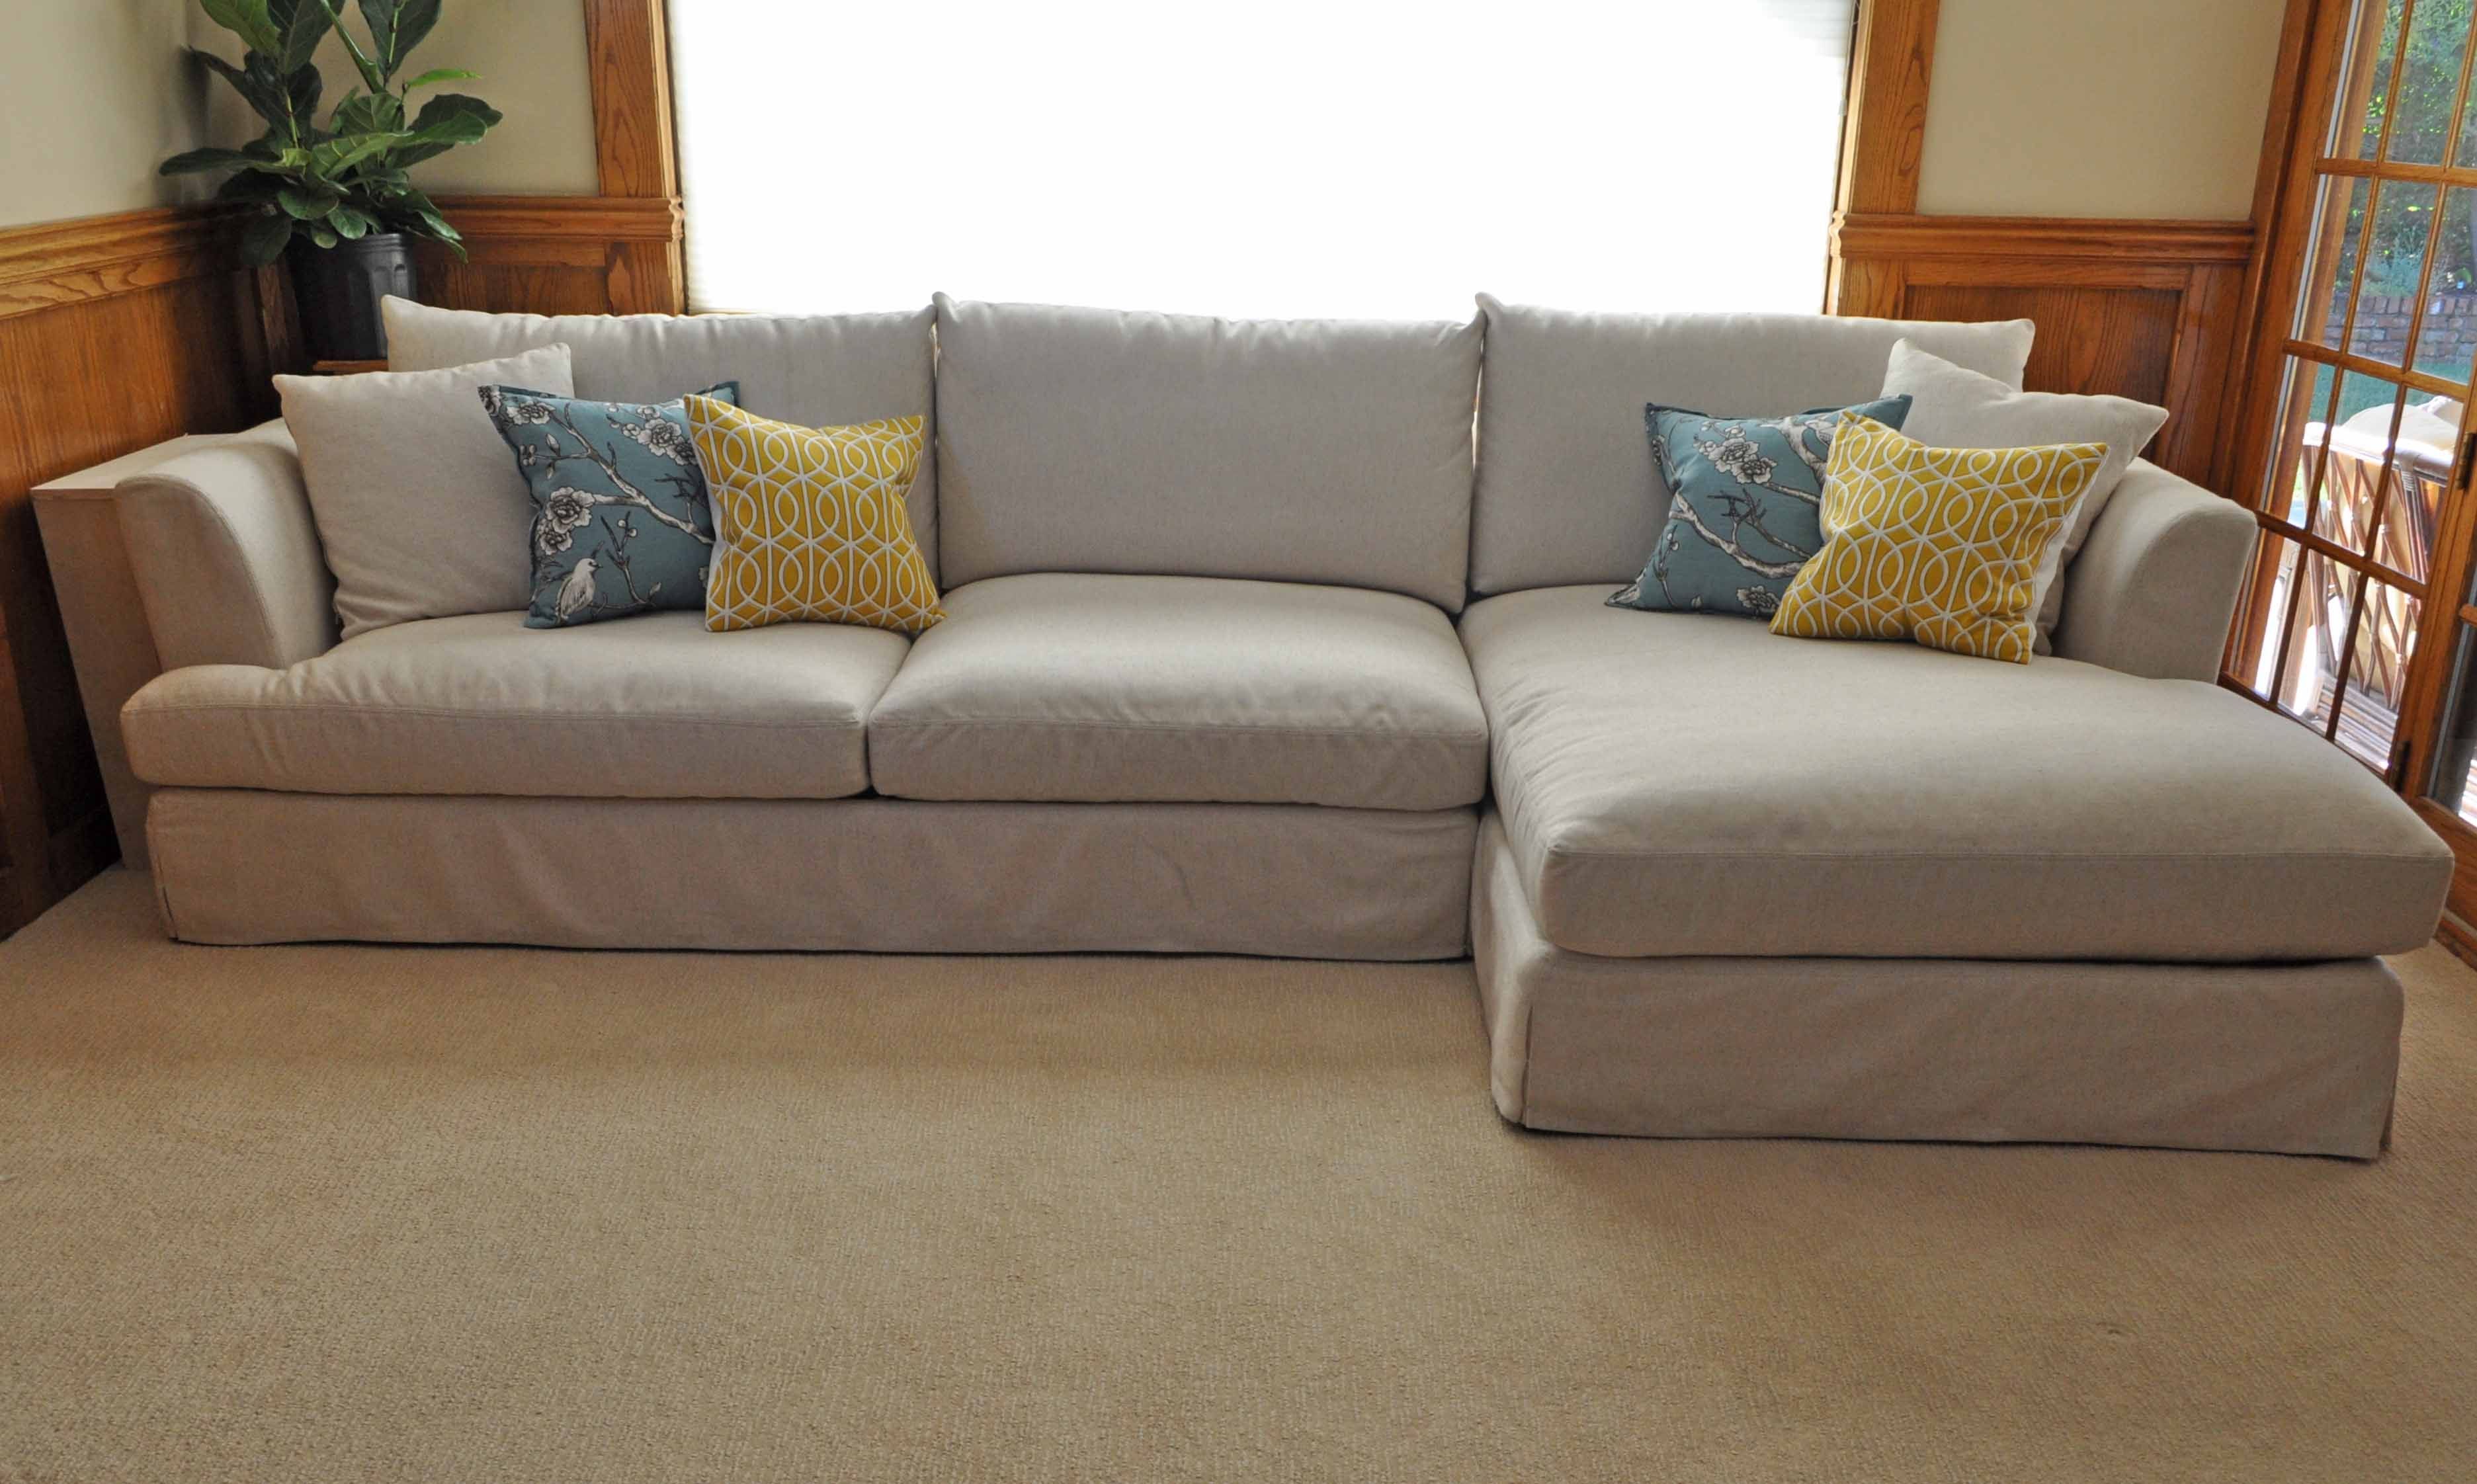 Sofas Center Cream Colored Leather Sofa Alluring Jpg Home Throughout Cream Colored Sofas (View 3 of 12)